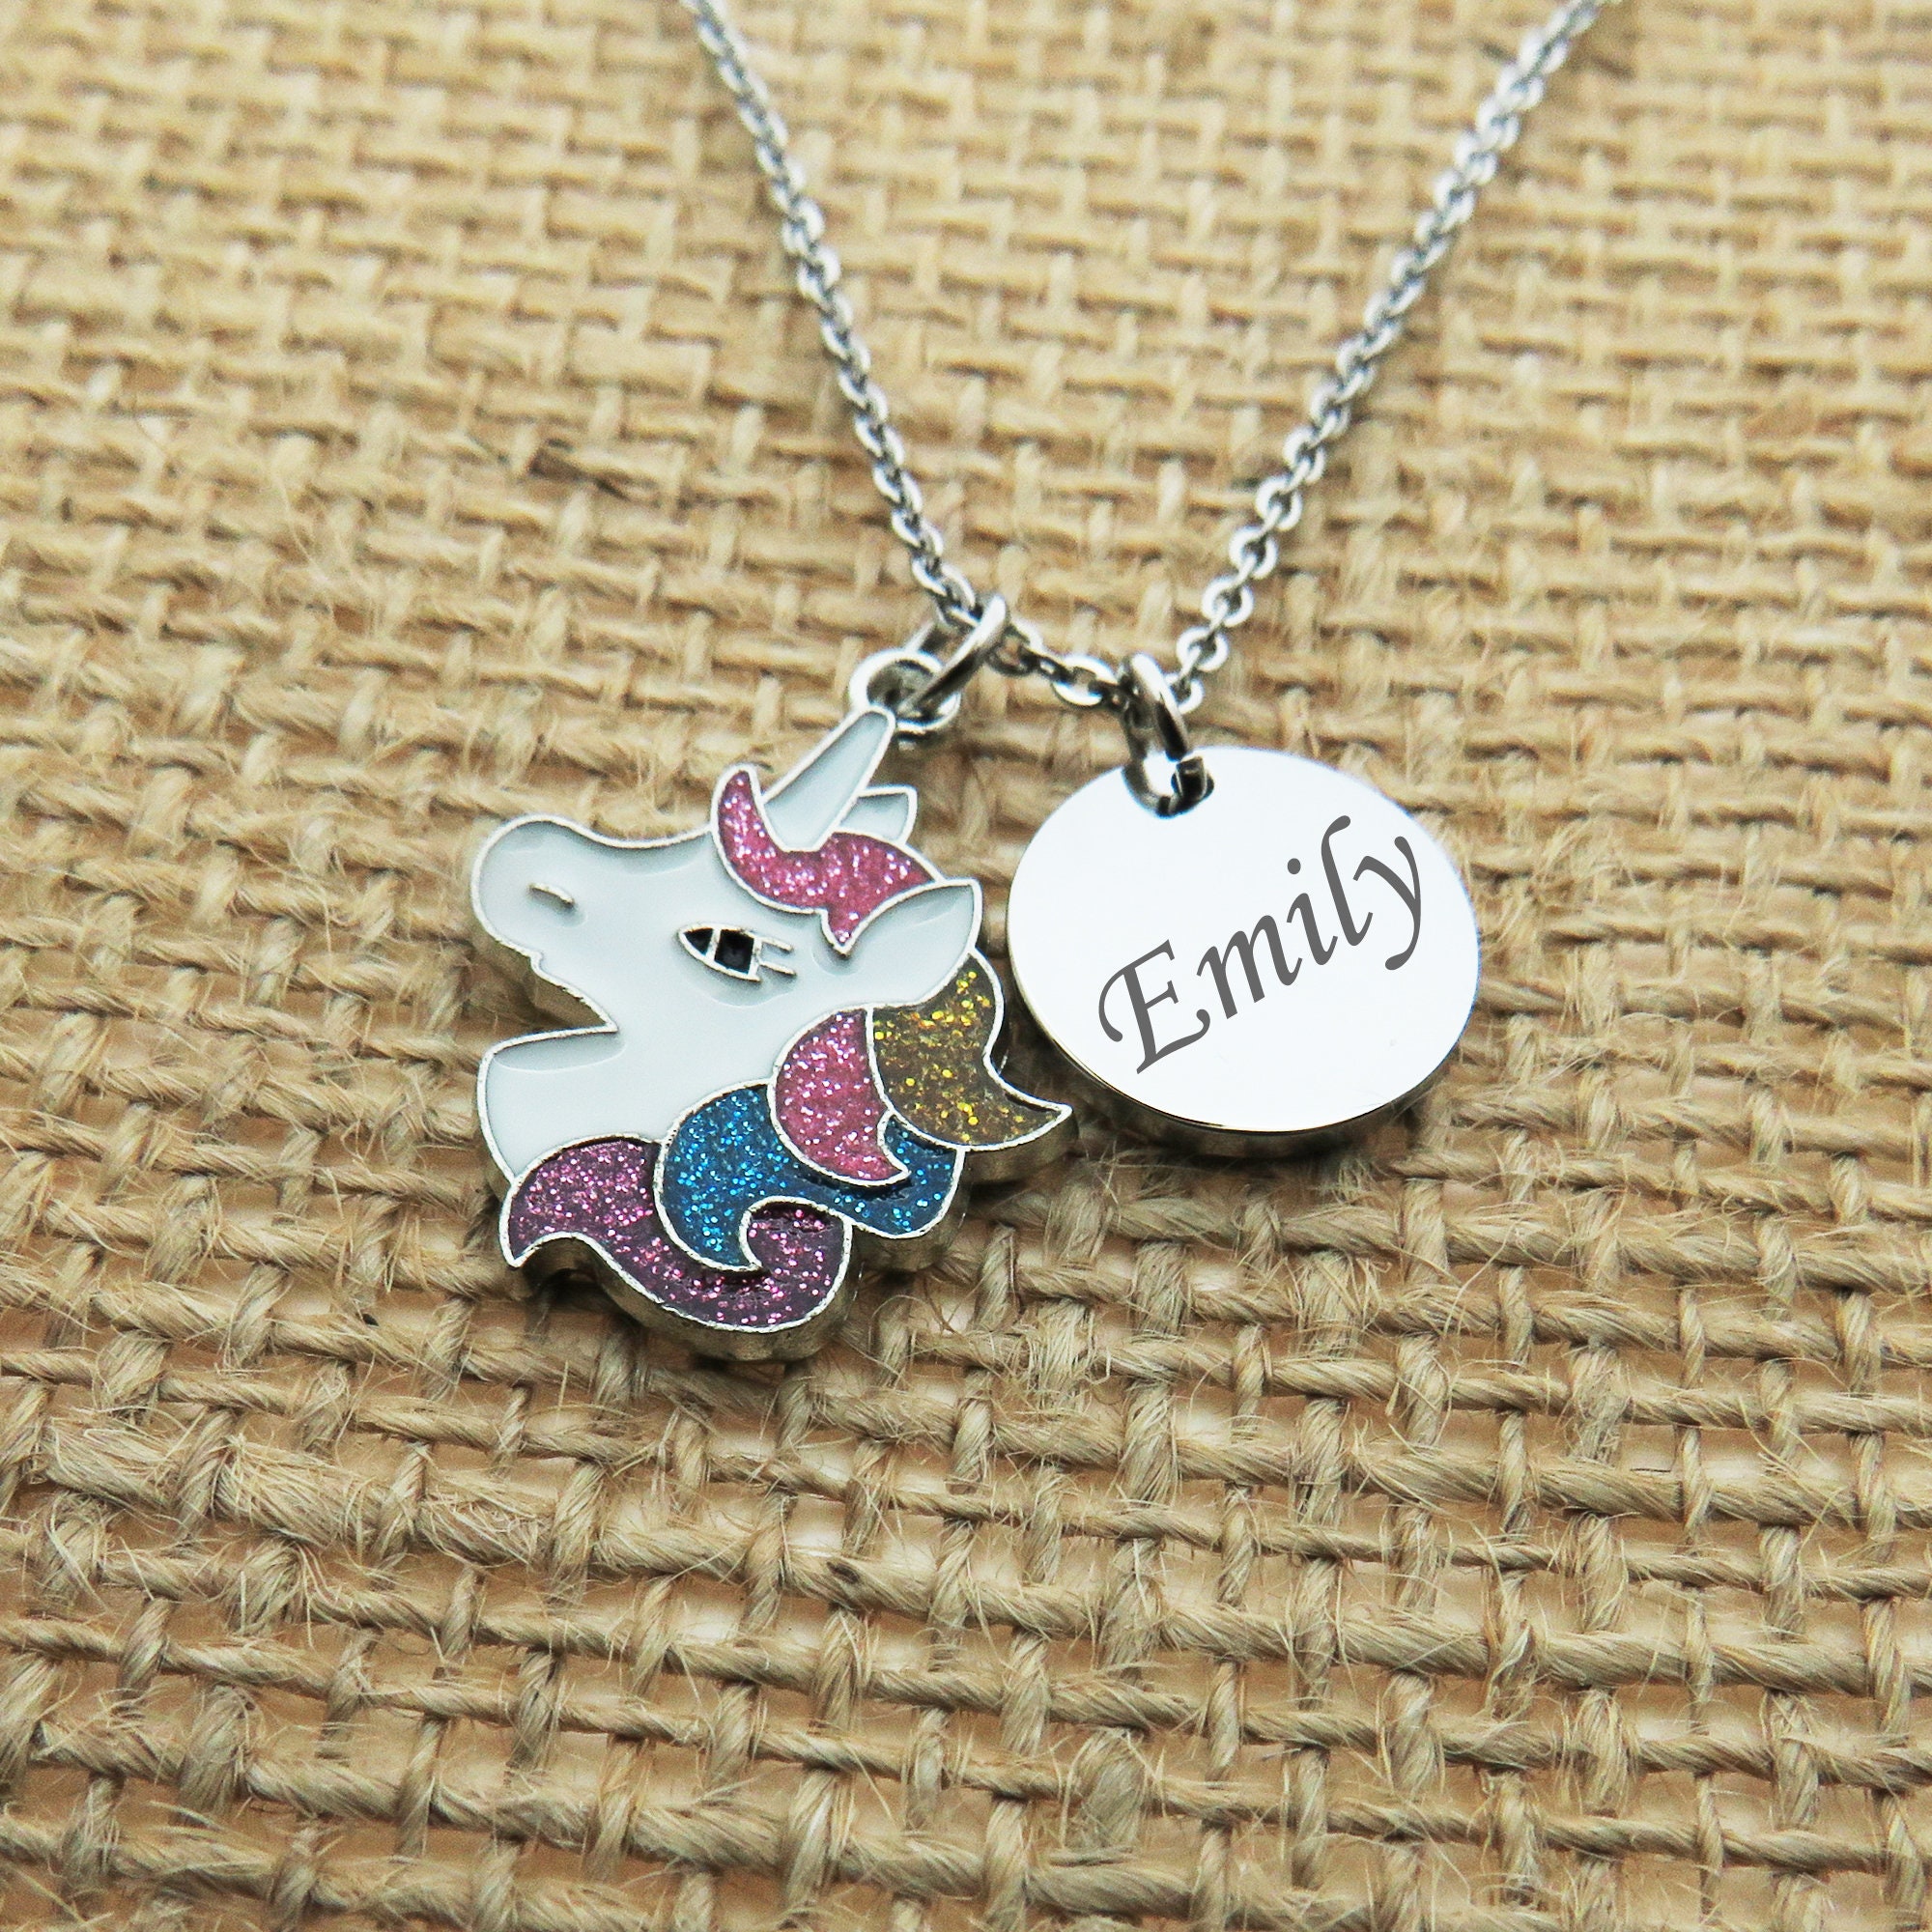 Granddaughter Gifts, Unicorns Jewelry Gifts for Little Girls Jewelry Ages 6-8 8-12 10-12 Year Old Girl Gifts Girls' Christmas Easter Kindergarten